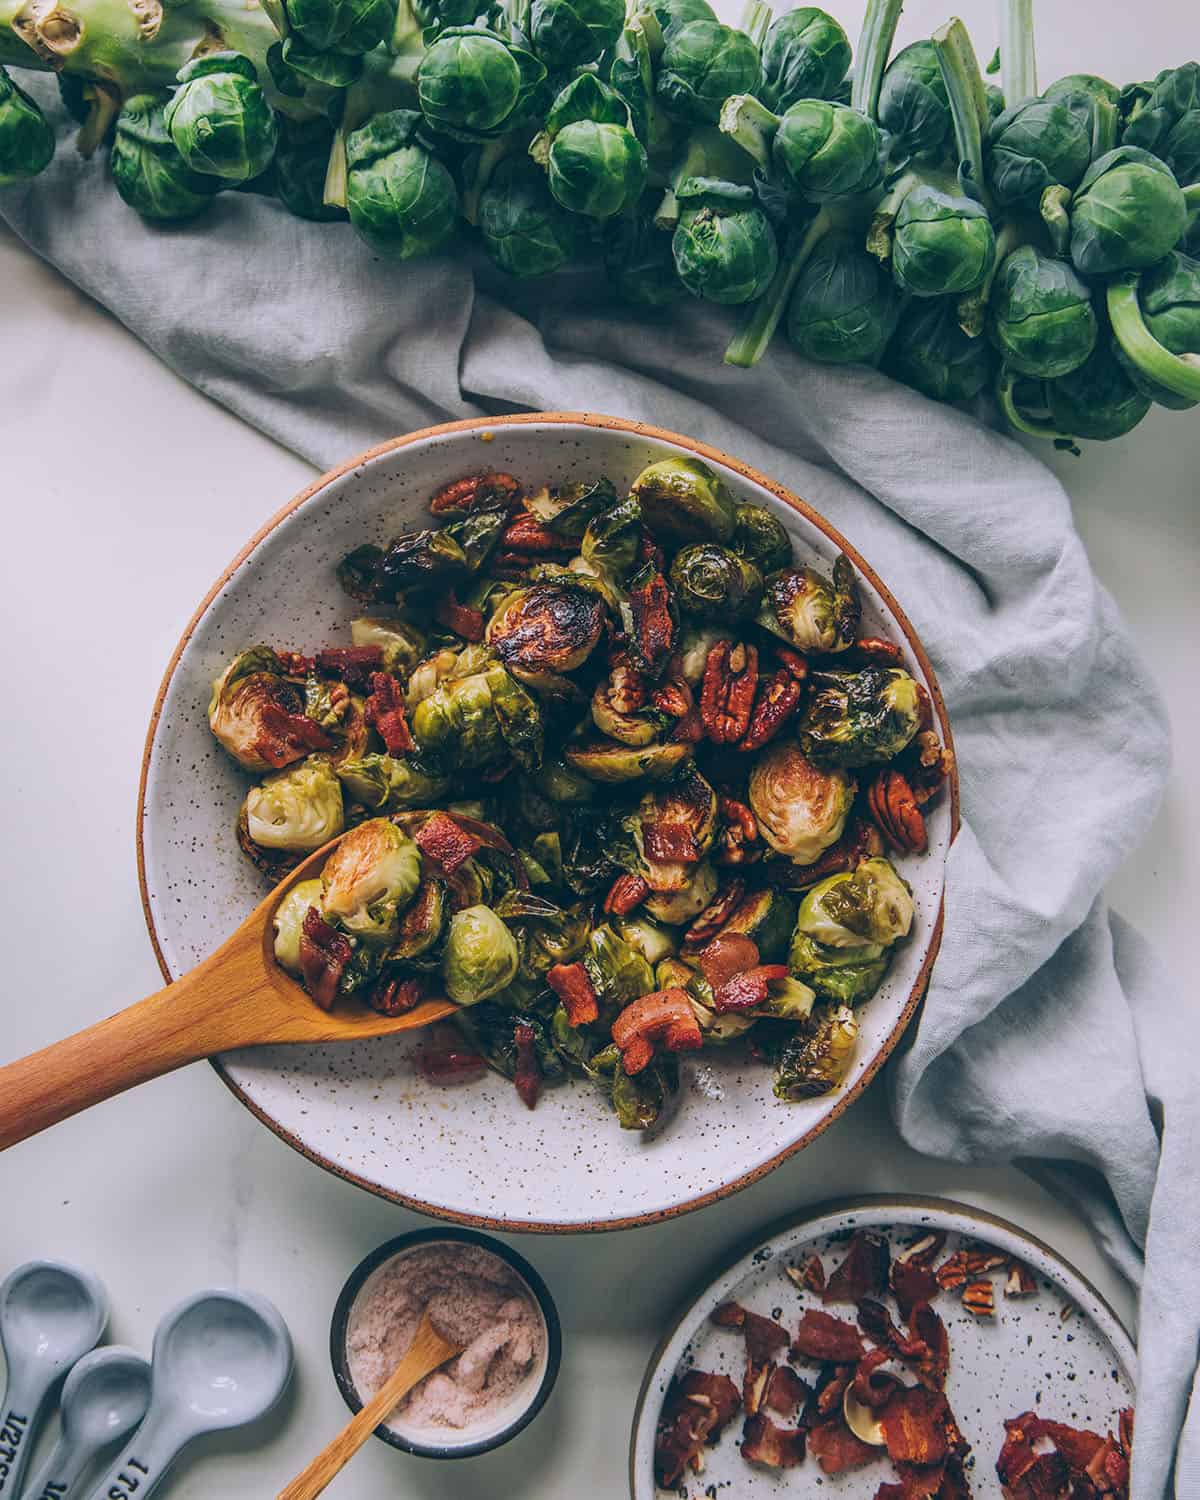 Roasted Brussels sprouts in a bowl with a wooden serving spoon, surrounded by a stalk of Brussels sprouts and other ingredients in bowls. 